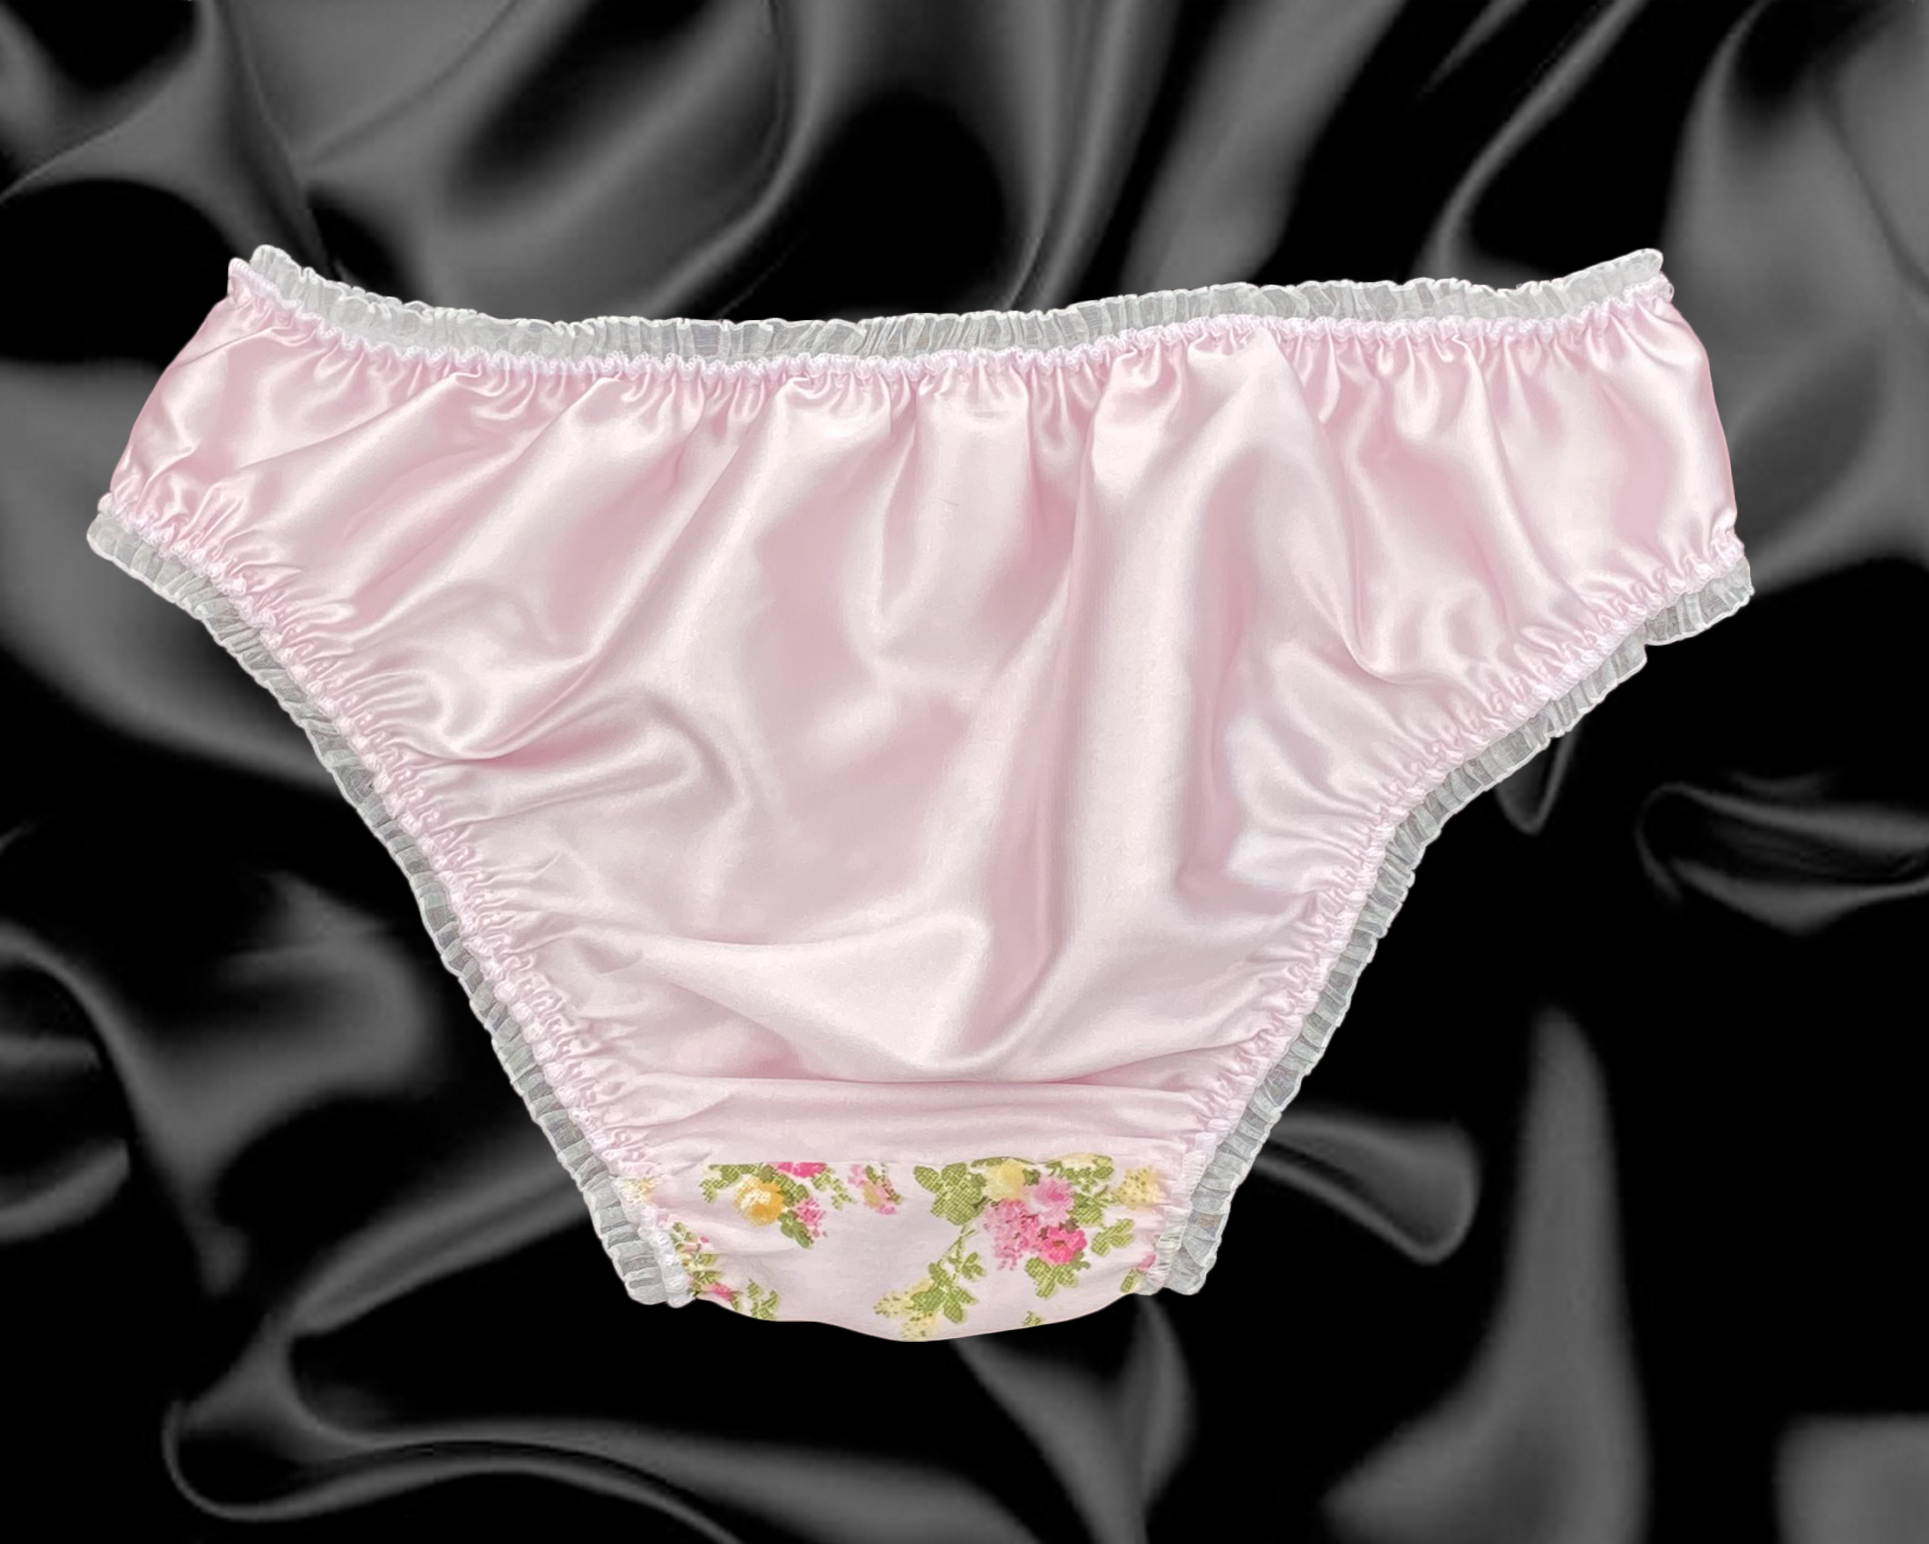 Satin Floral Frilly Lace Sissy Bikini Knickers Briefs Full Panties Size ...